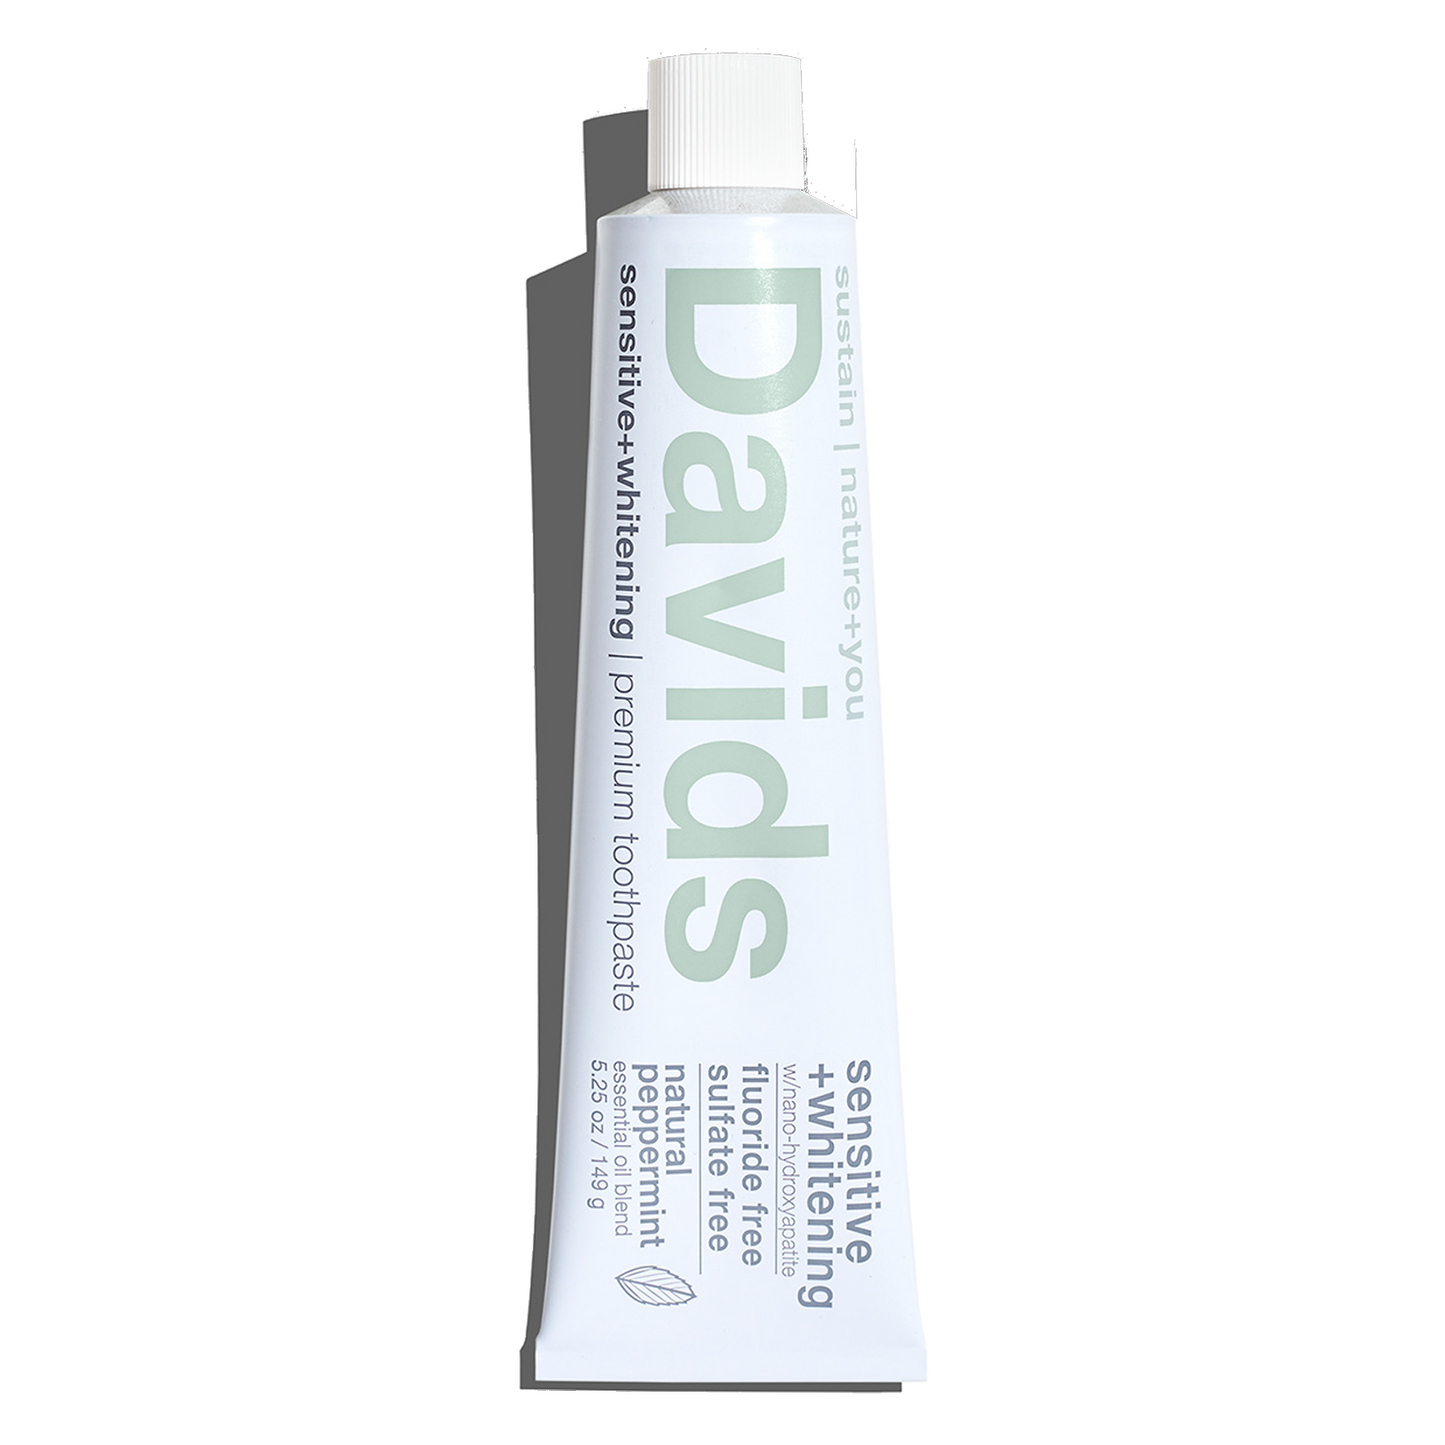 New! Davids Natural Toothpaste MOBILE/TRAVEL SIZE - Peppermint Sensitive+Whitening